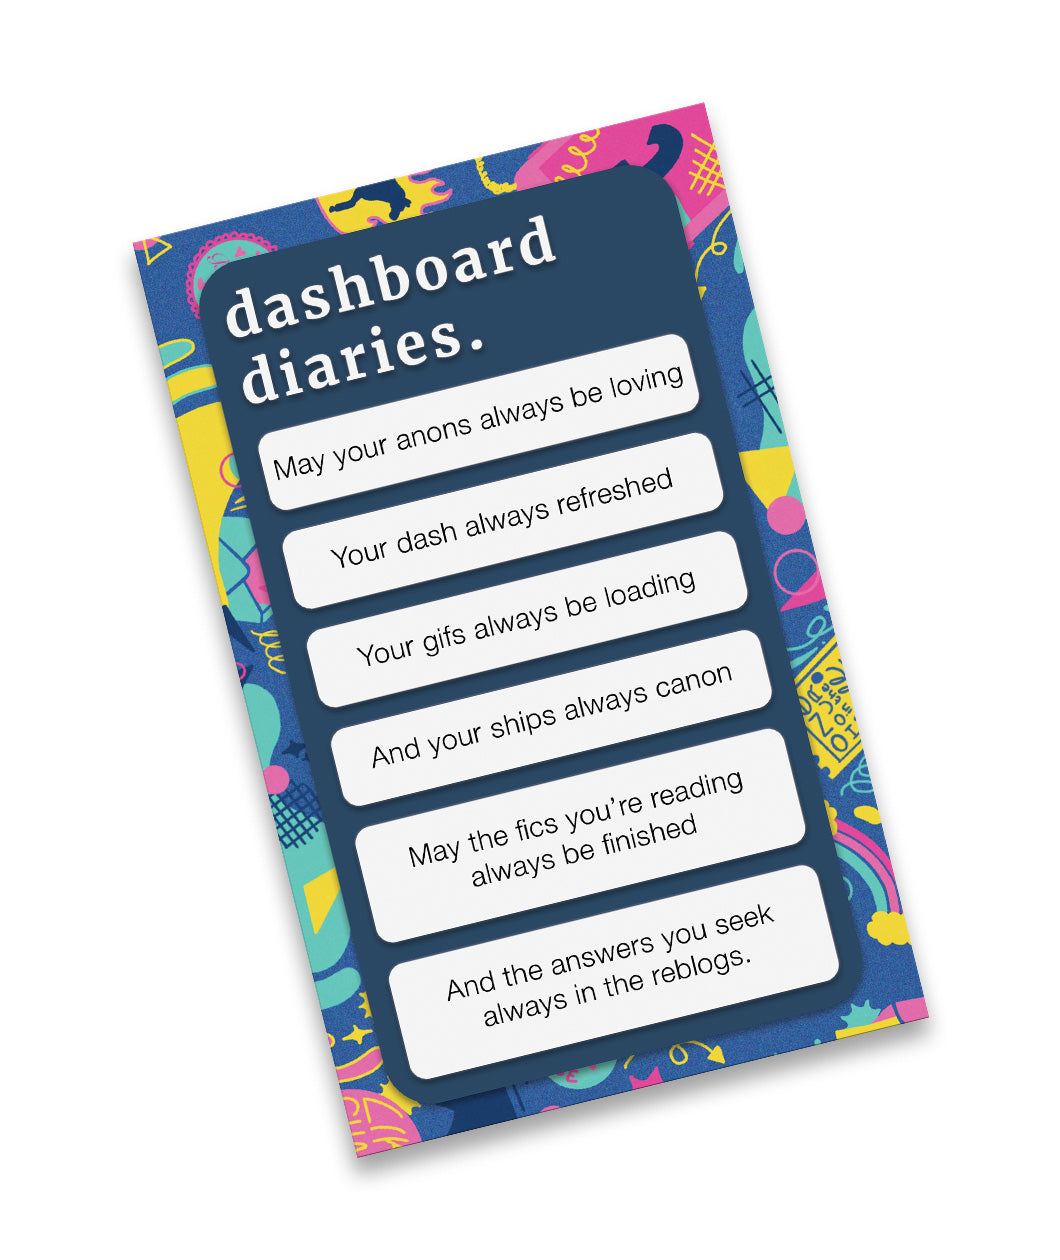 A colorful postcard with the text "dashboard diaries." and a list of positive tumblr wishes. From Atypical Artists.